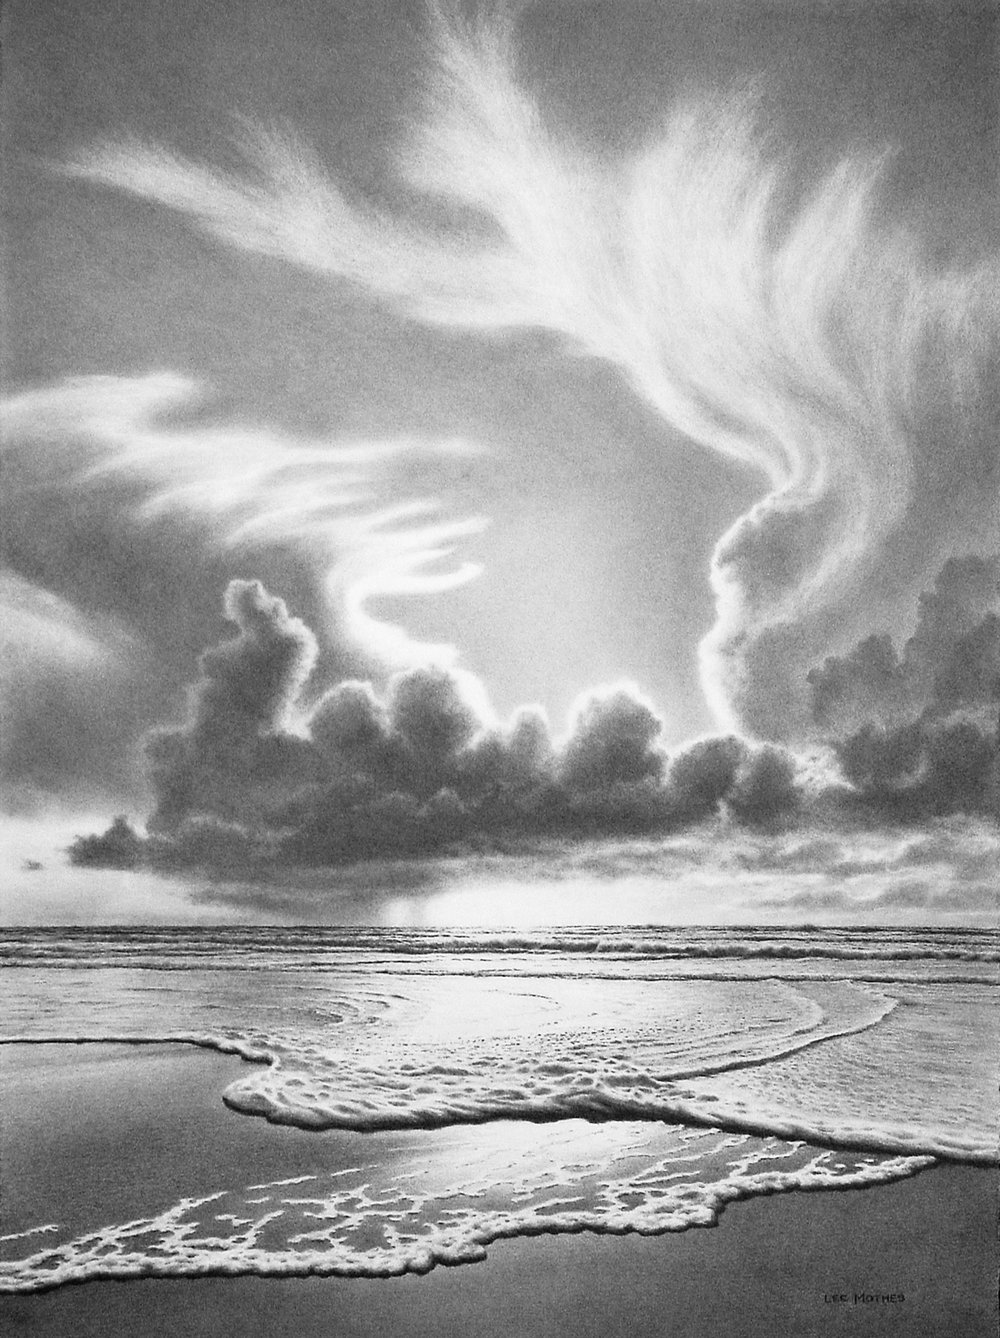 Sky Pencil Sketch at PaintingValley.com | Explore collection of Sky